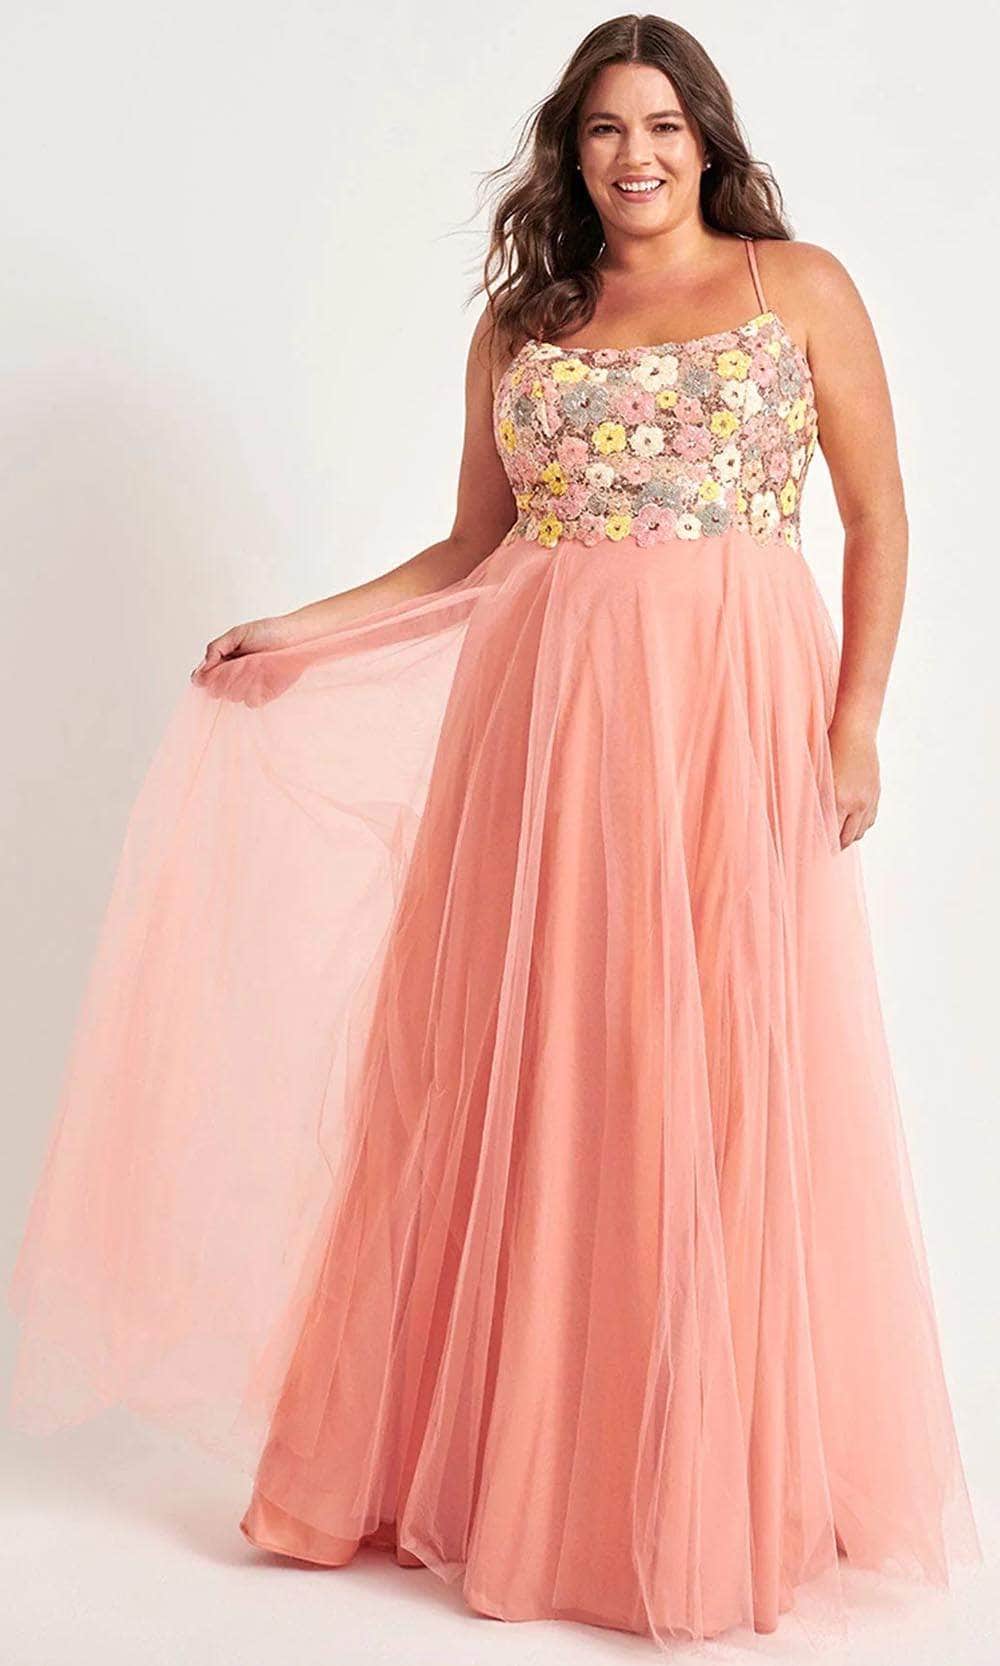 Image of Faviana 9557 - Scoop A-Line Prom Dress